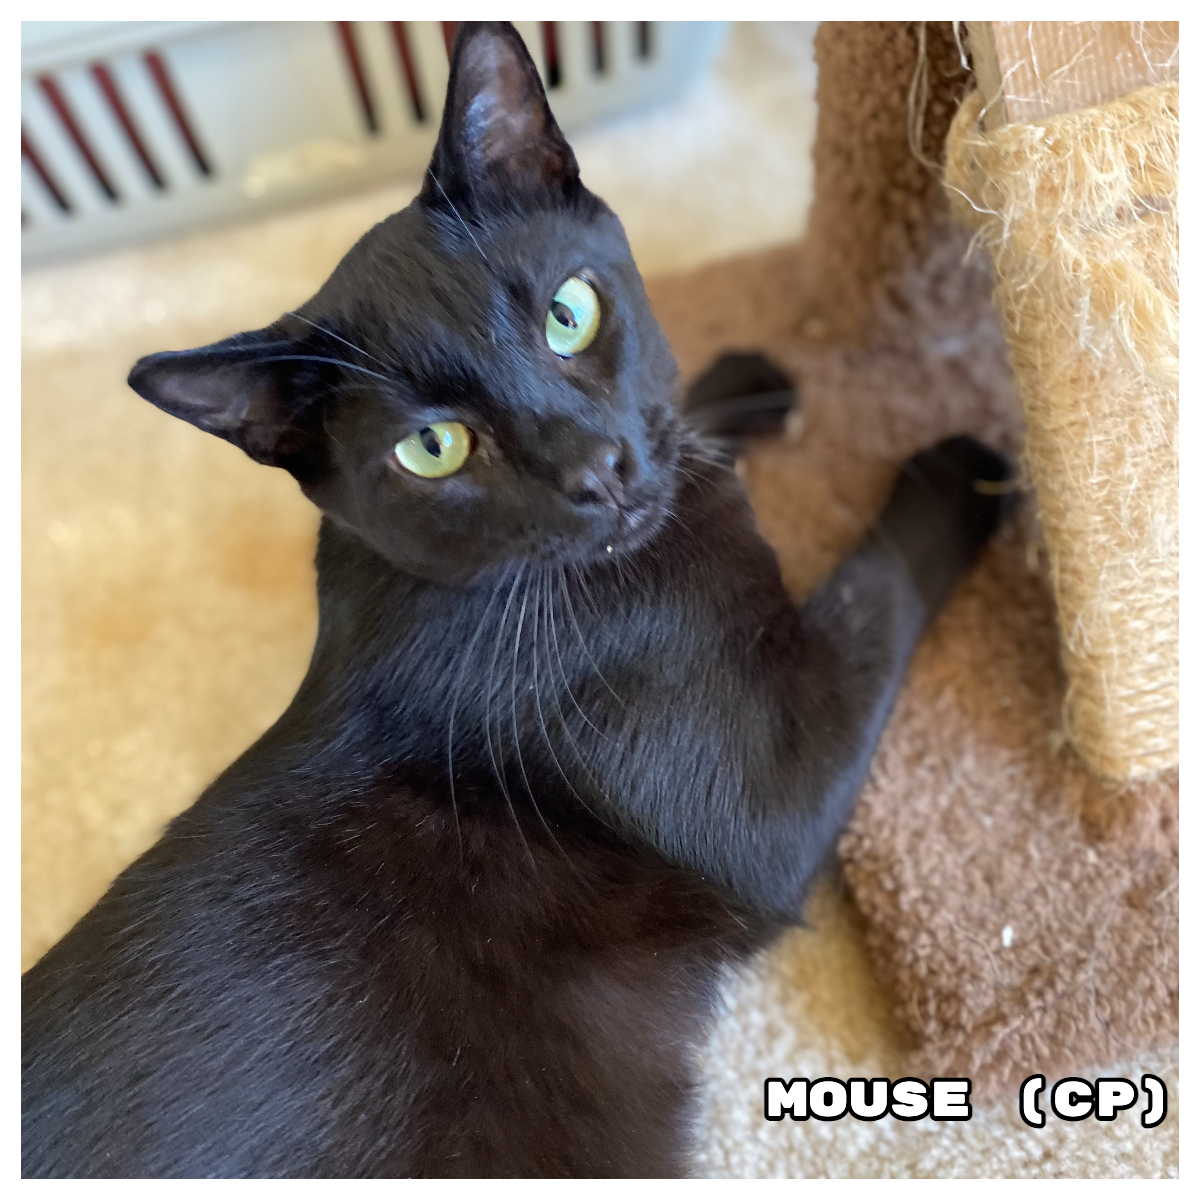 #ContraCosta Co, CA: Hi, I’m MOUSE (CP)! I’m a big boy with pure black fur, except for a light spot on my chest. I'm a little shy at first, but I’m sweet and love attention & pets. I was born approx April 2022... 
adoptrescuecatsinca.com 
#adoptdontshop #Richmond #cats #Caturday